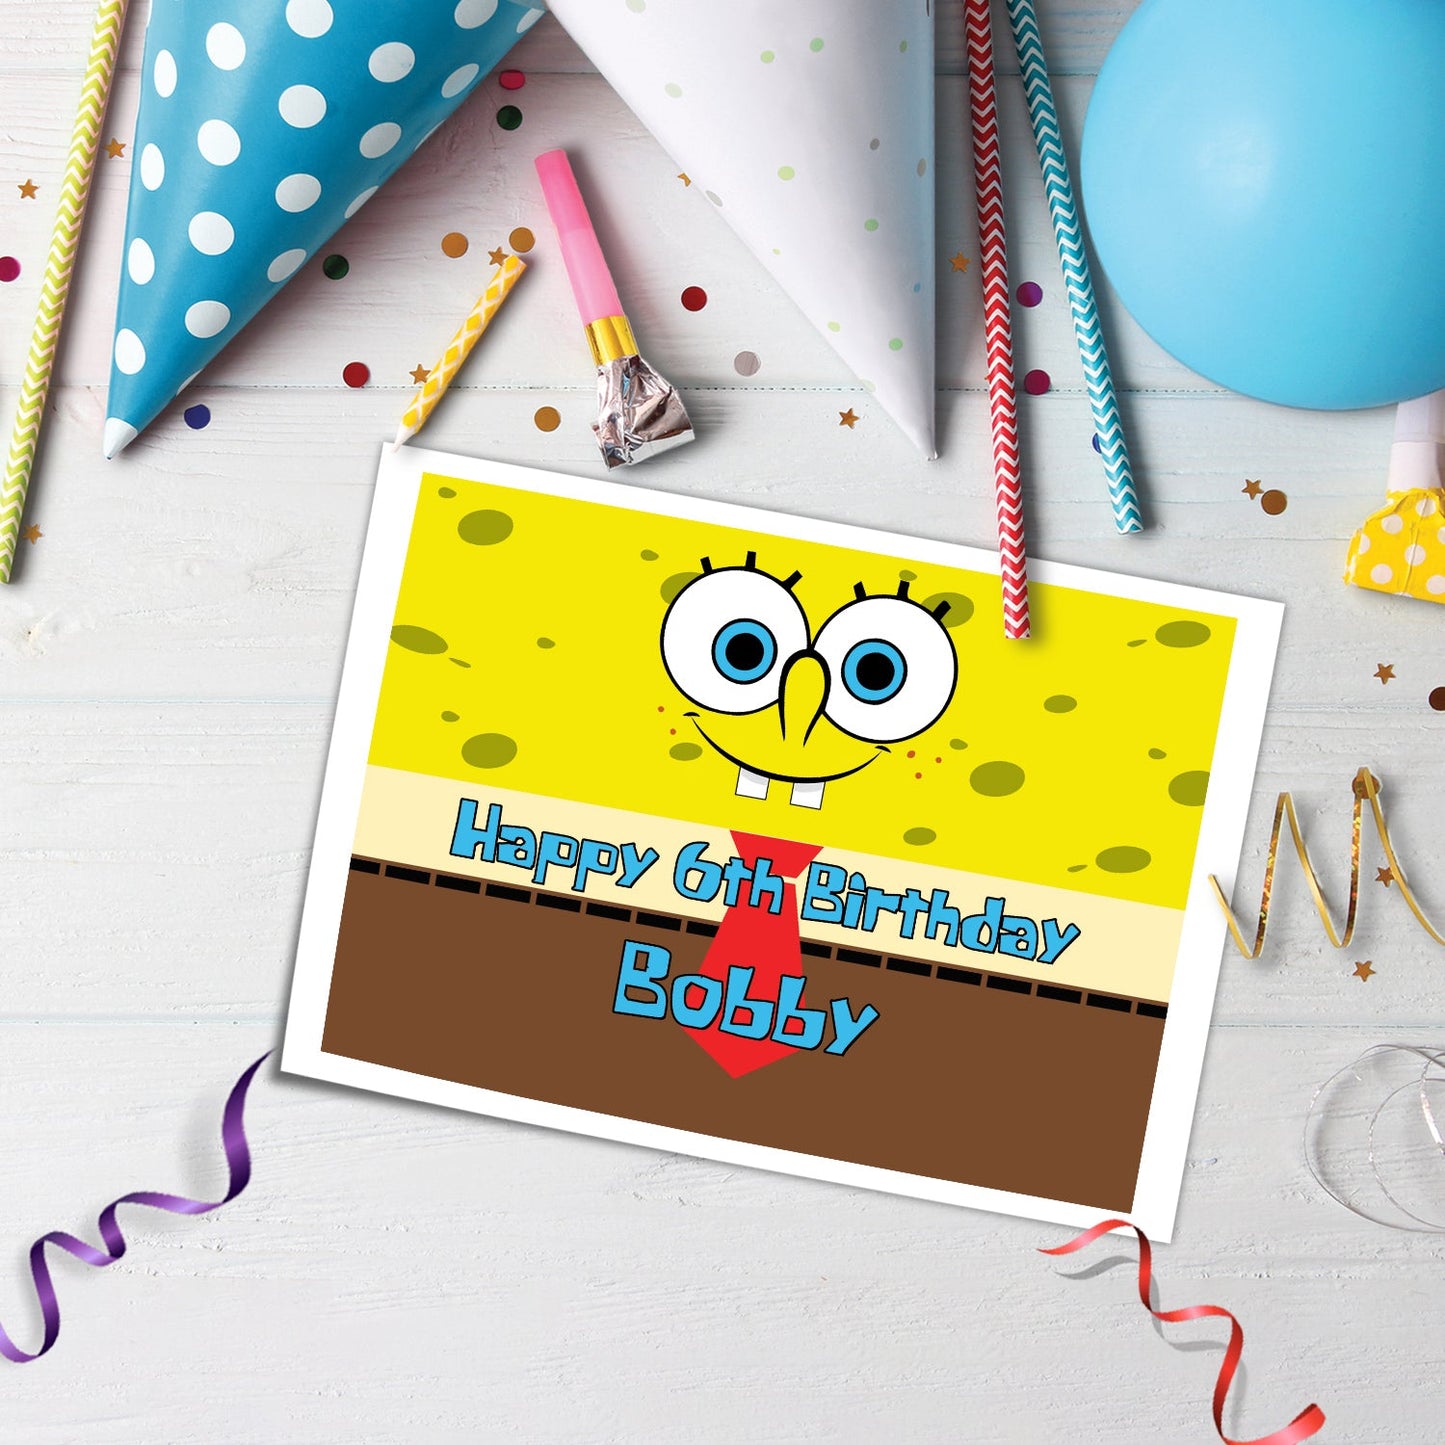 Enhance Your Cake Design with Spongebob Personalized Edible Sheet Cake Images - Rectangle